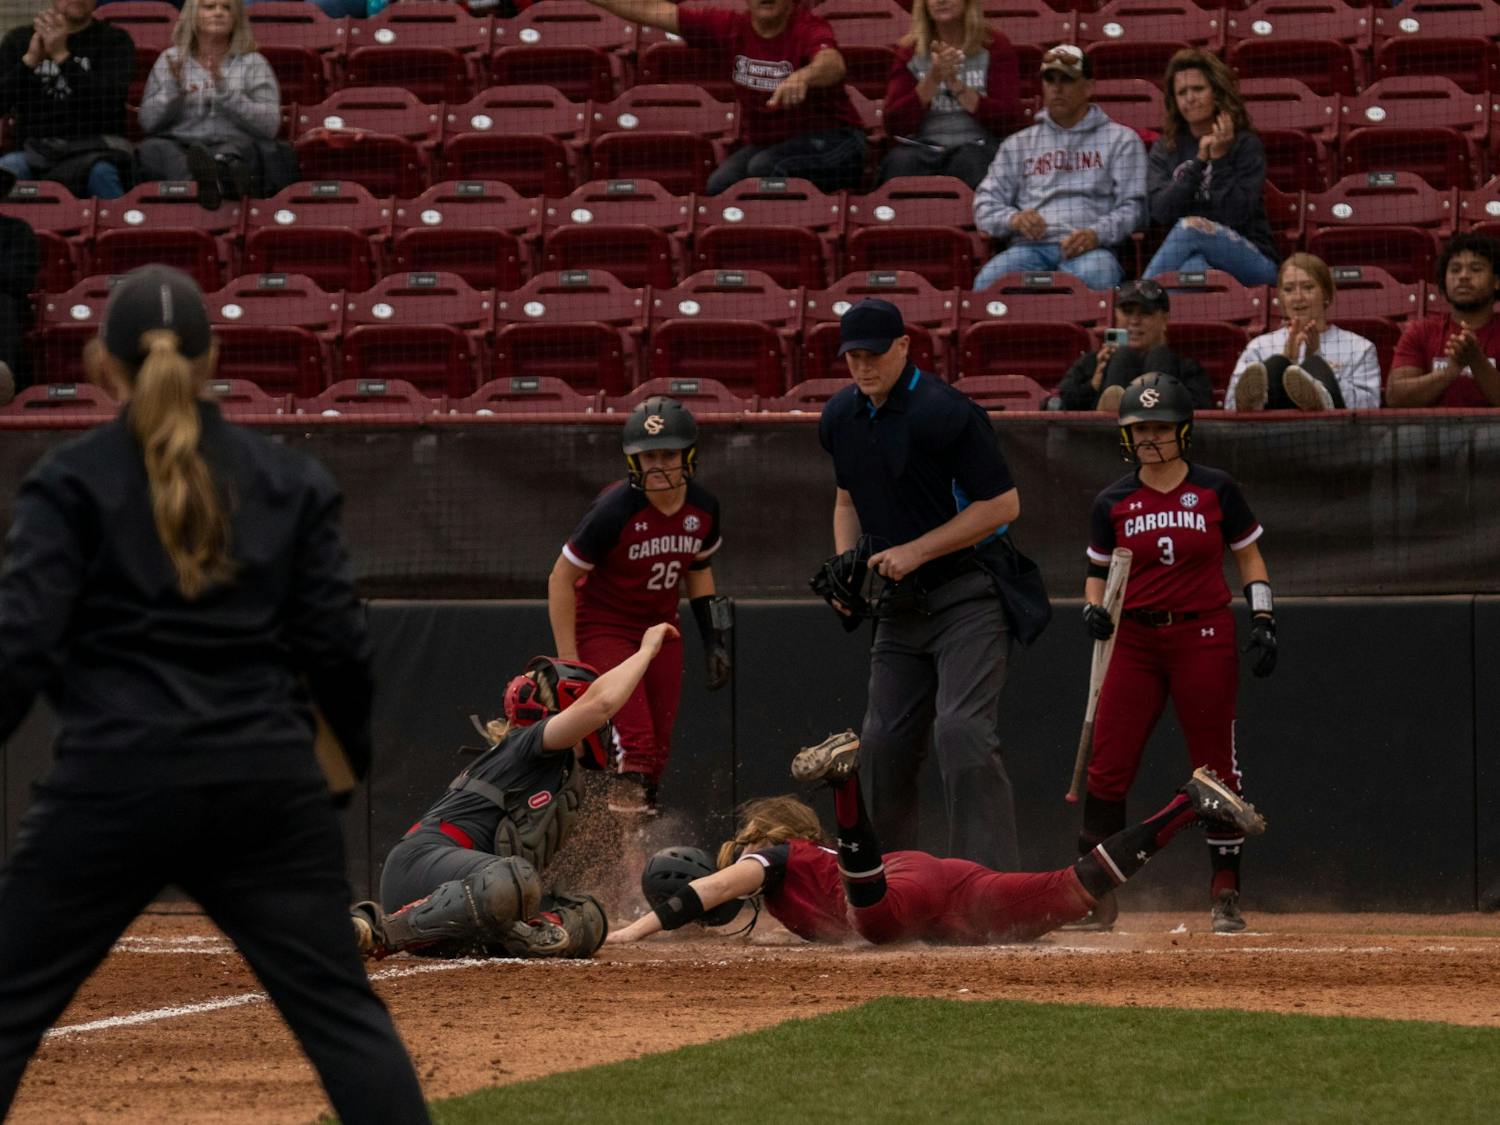 Freshmen Emma Sellers, crashes into umpire in an attempt to beat the ball to home plate in the fifth inning against Ohio State on Feb. 26, 2022, at Beckham Field. Carolina lost in their third game of the Carolina Classic against Ohio State 6-2. 